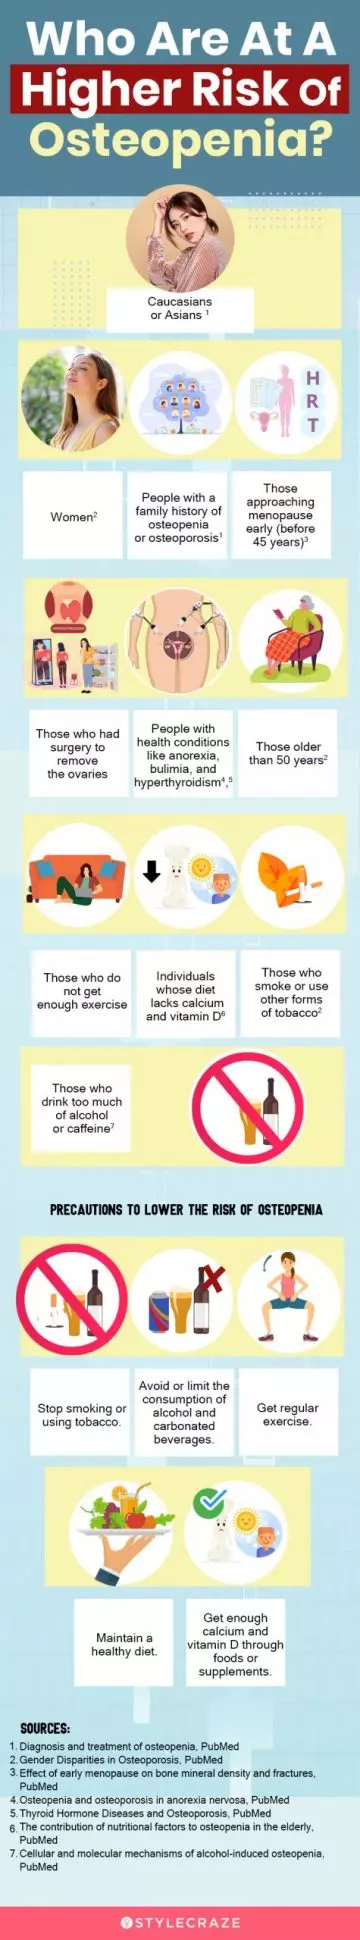 who are at a higher risk of osteopenia (infographic)